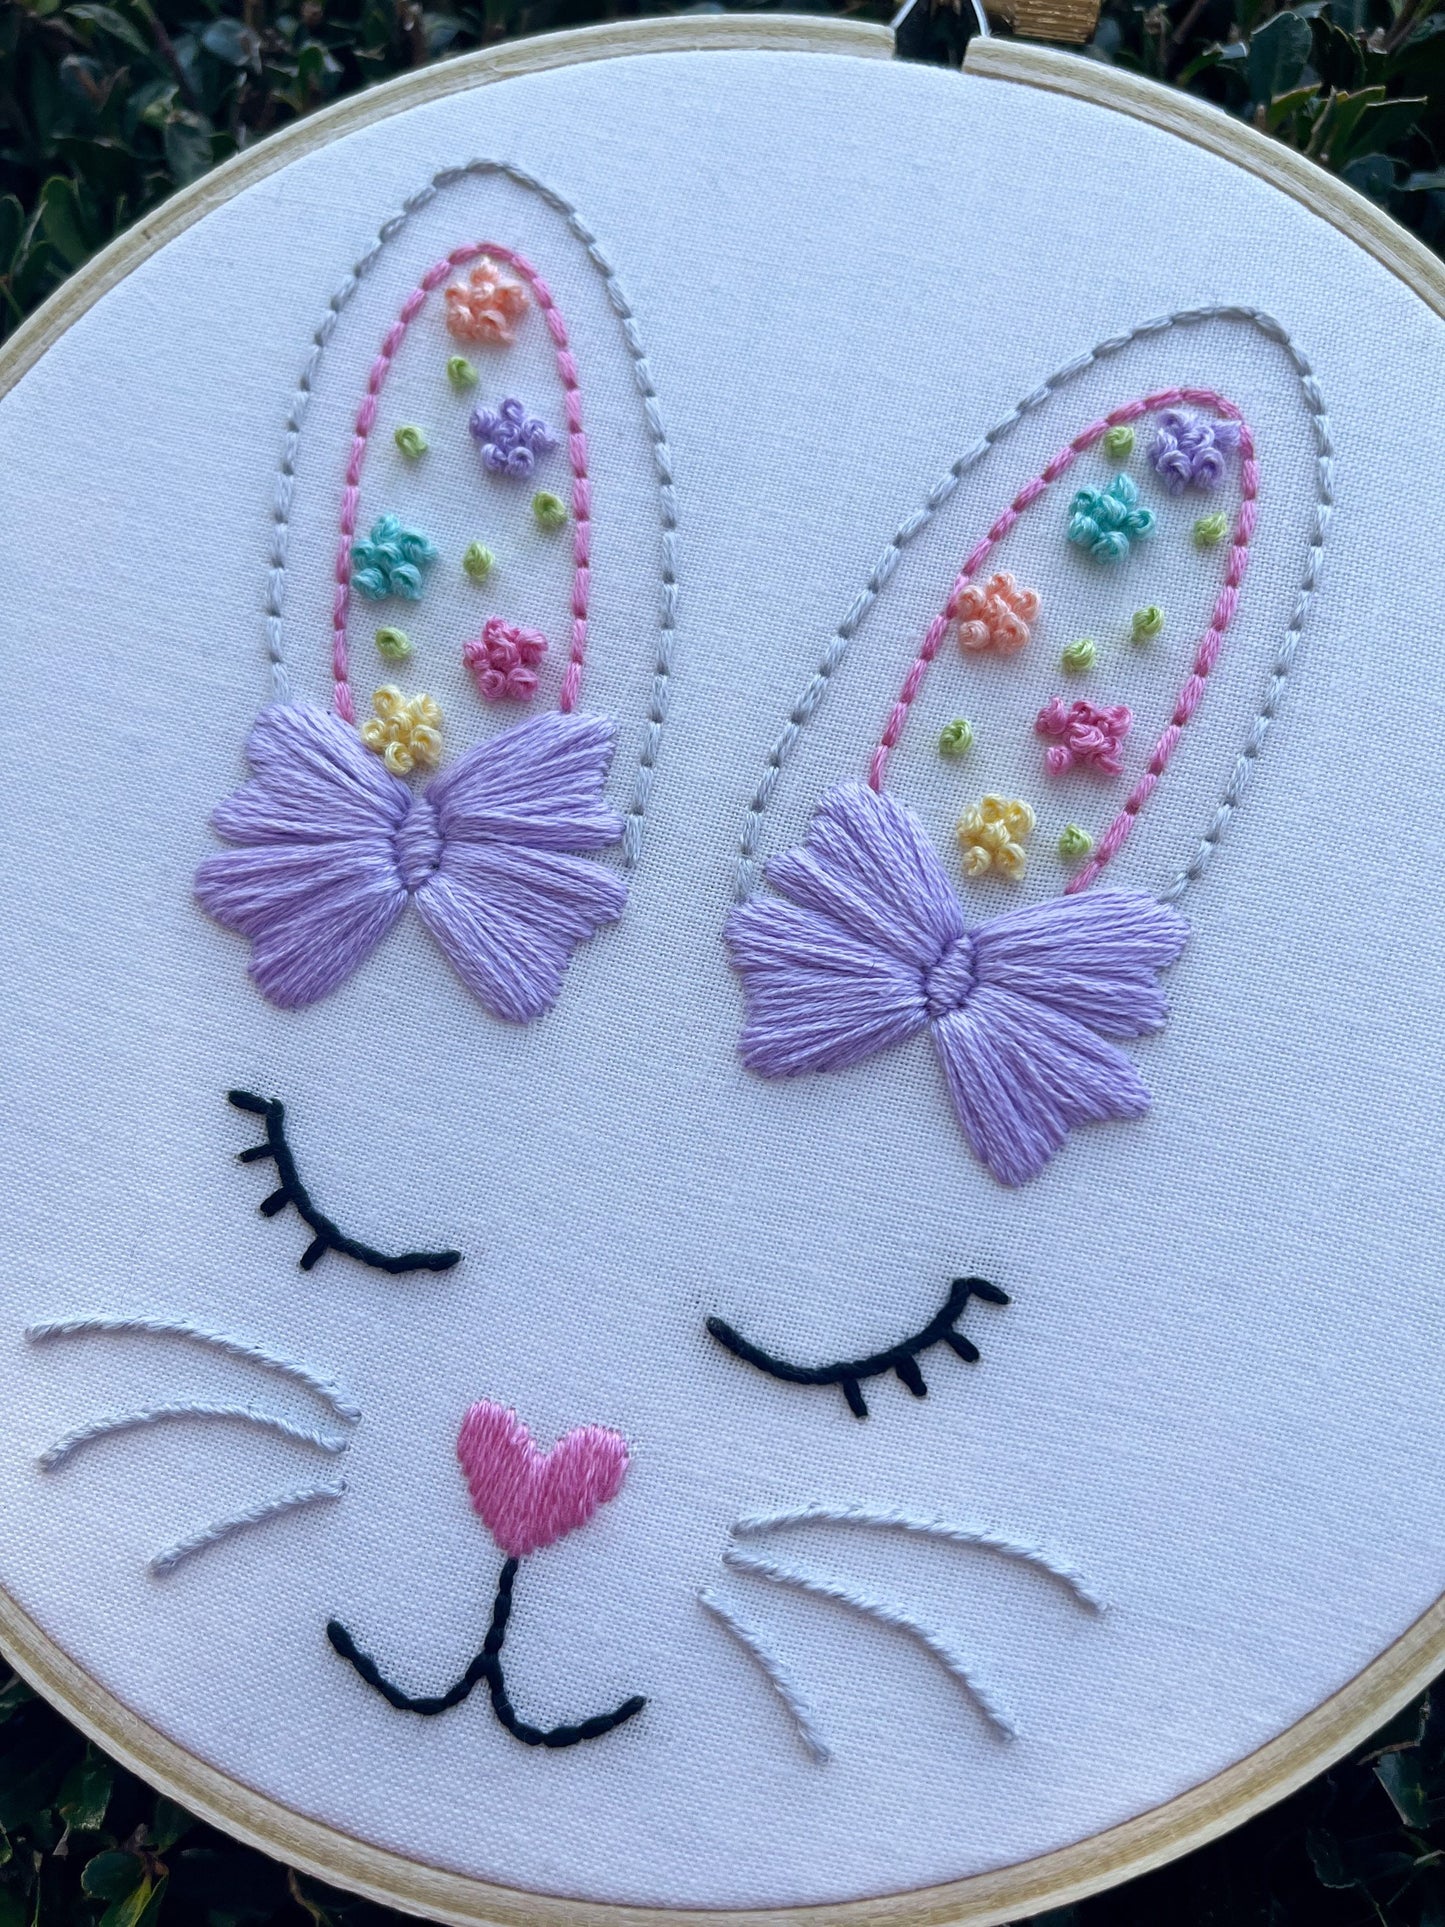 6” Bunny with Bows - Handmade Embroidery Hoop